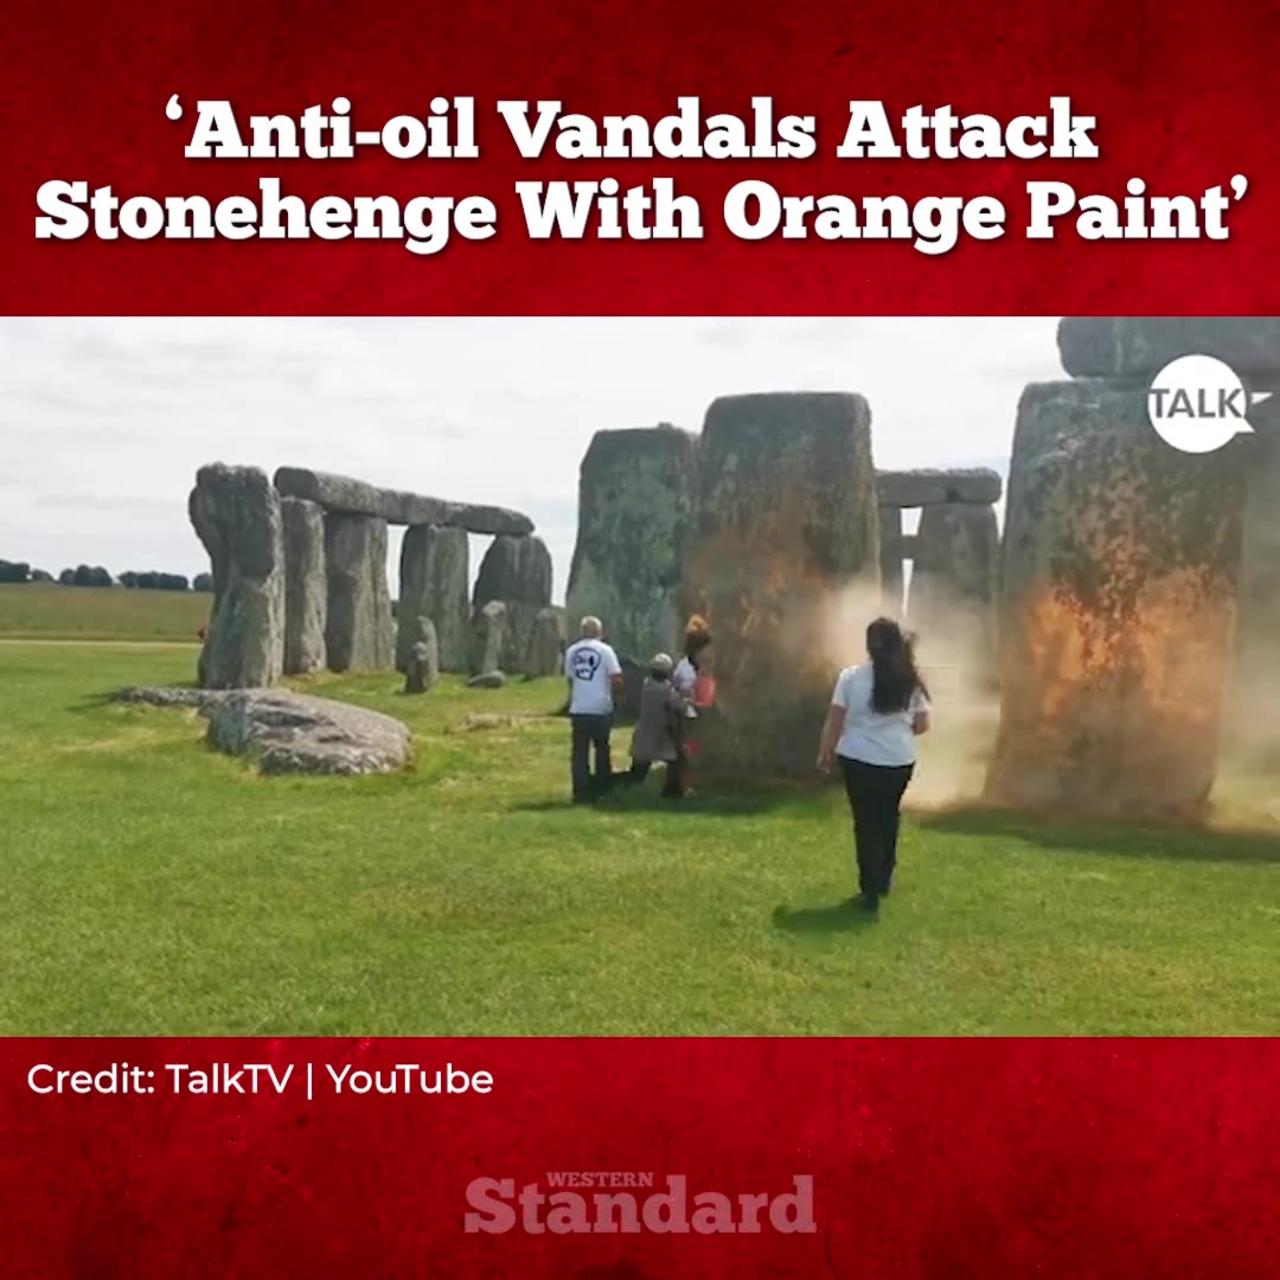 Anti-oil activists douse Stonehenge with orange paint ahead of summer solstice